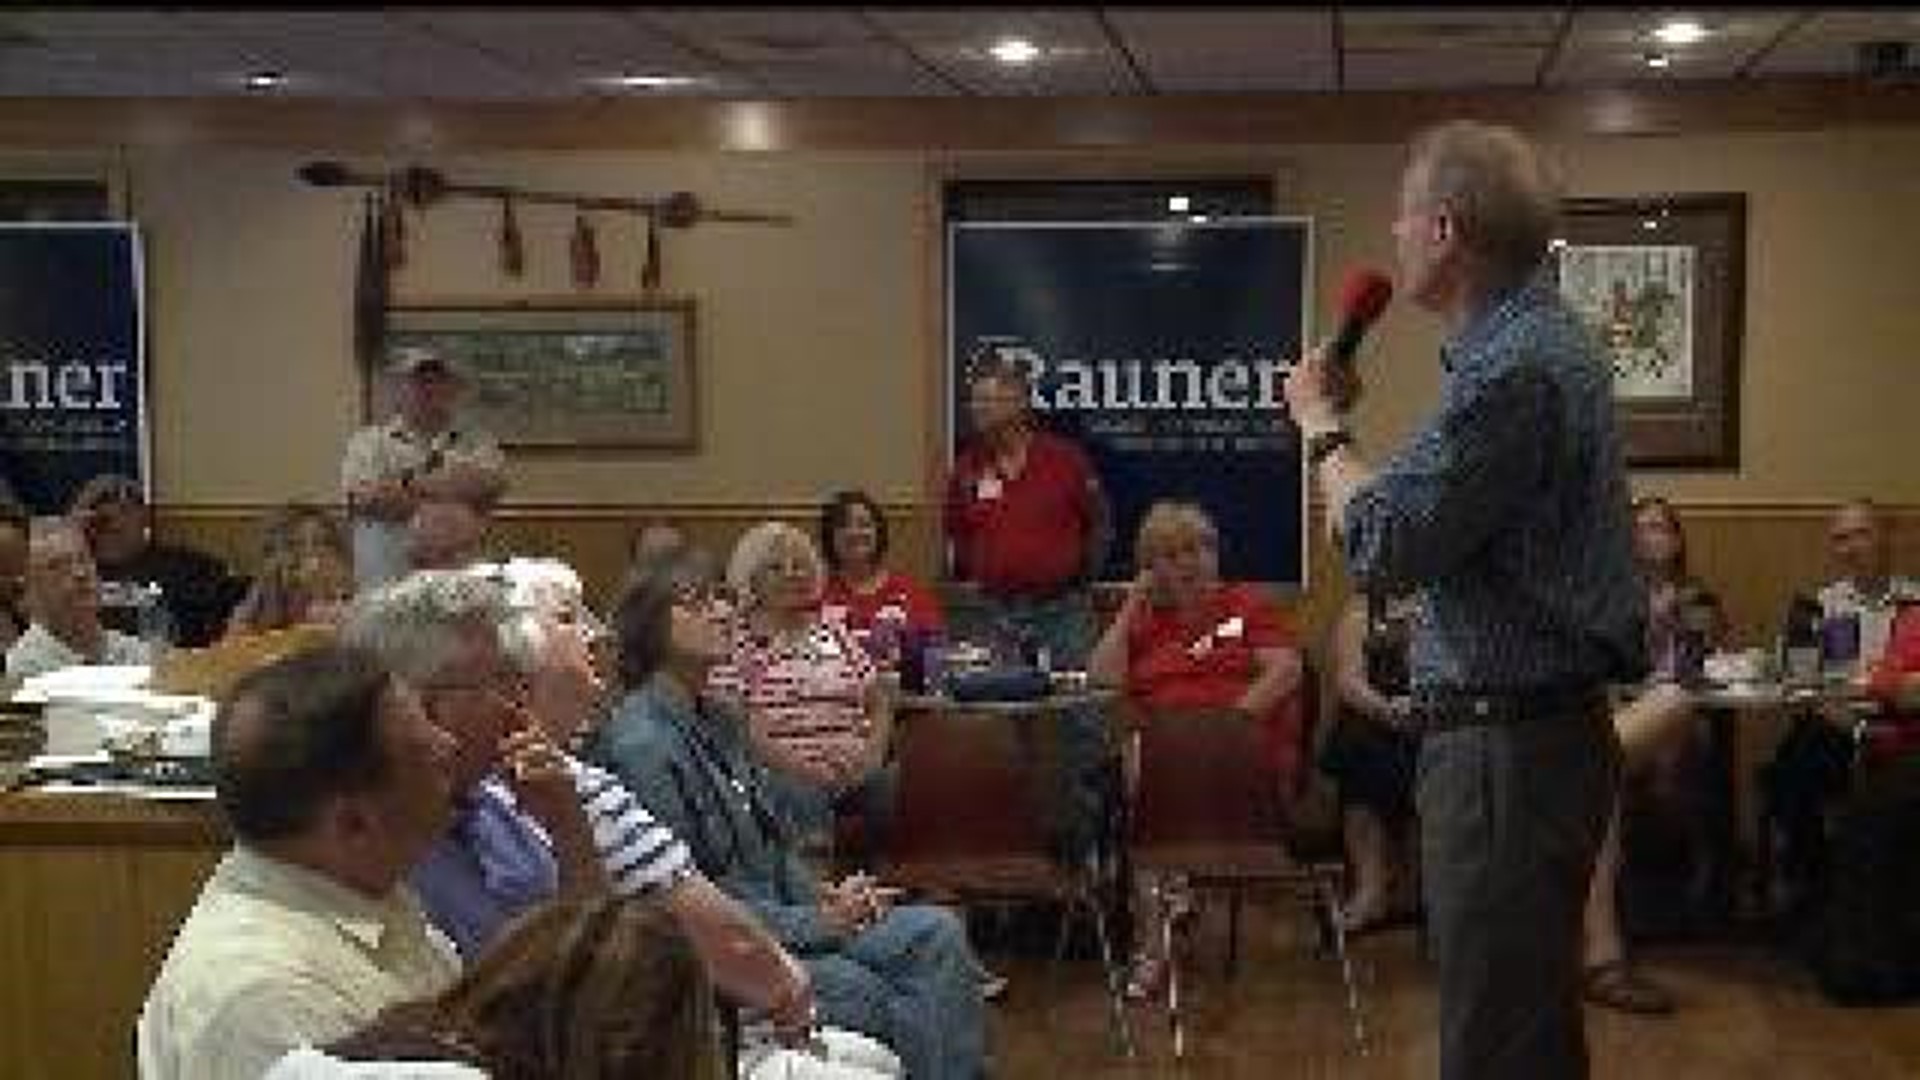 Bruce Rauner Stops in the Quad Cities